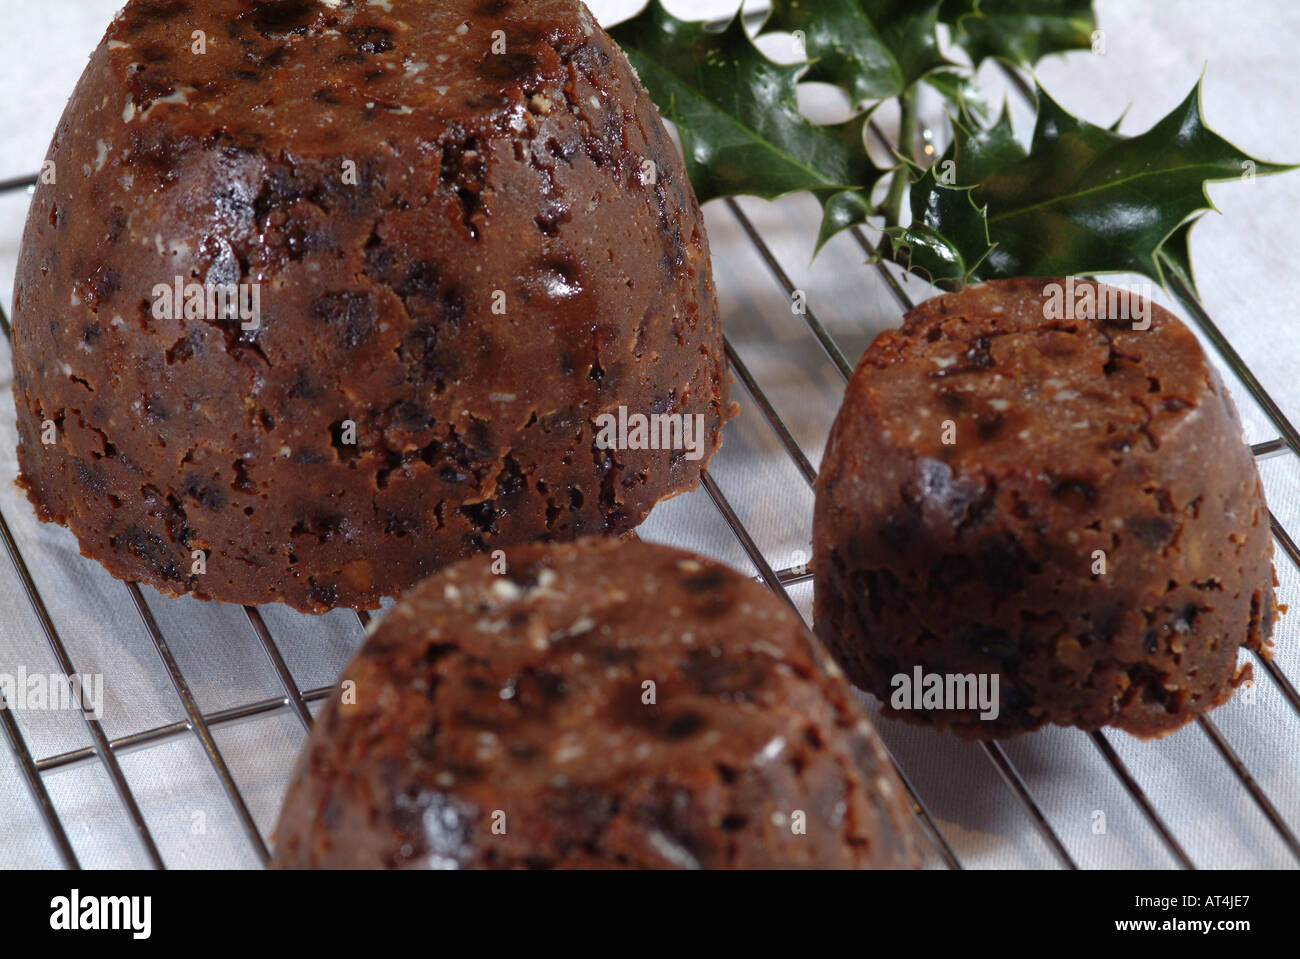 Three Christmas Puddings on Wire Baking Tray Prior to Steaming Stock Photo